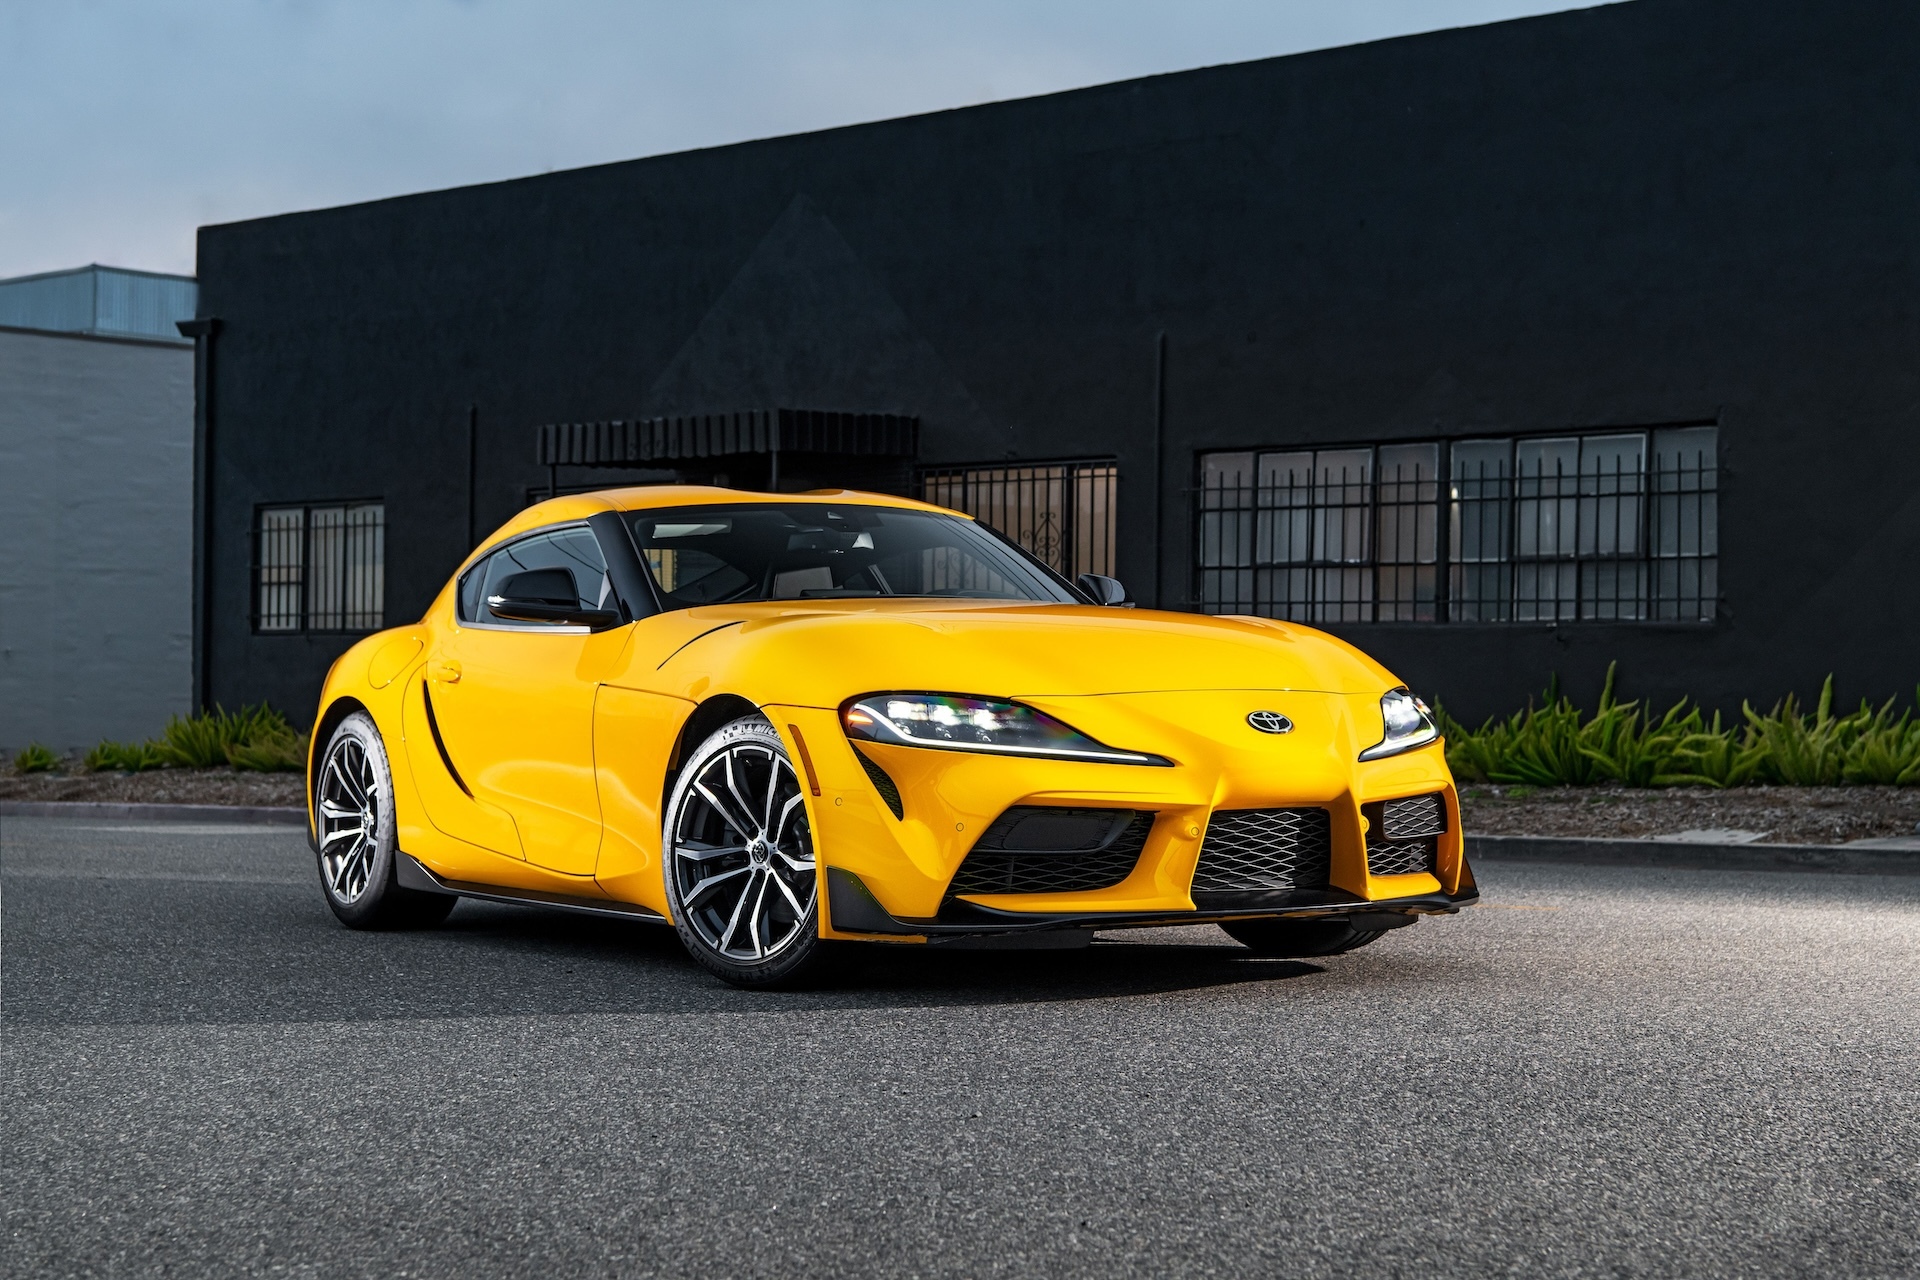 Toyota has abandoned the Supra sports car with a basic turbo engine